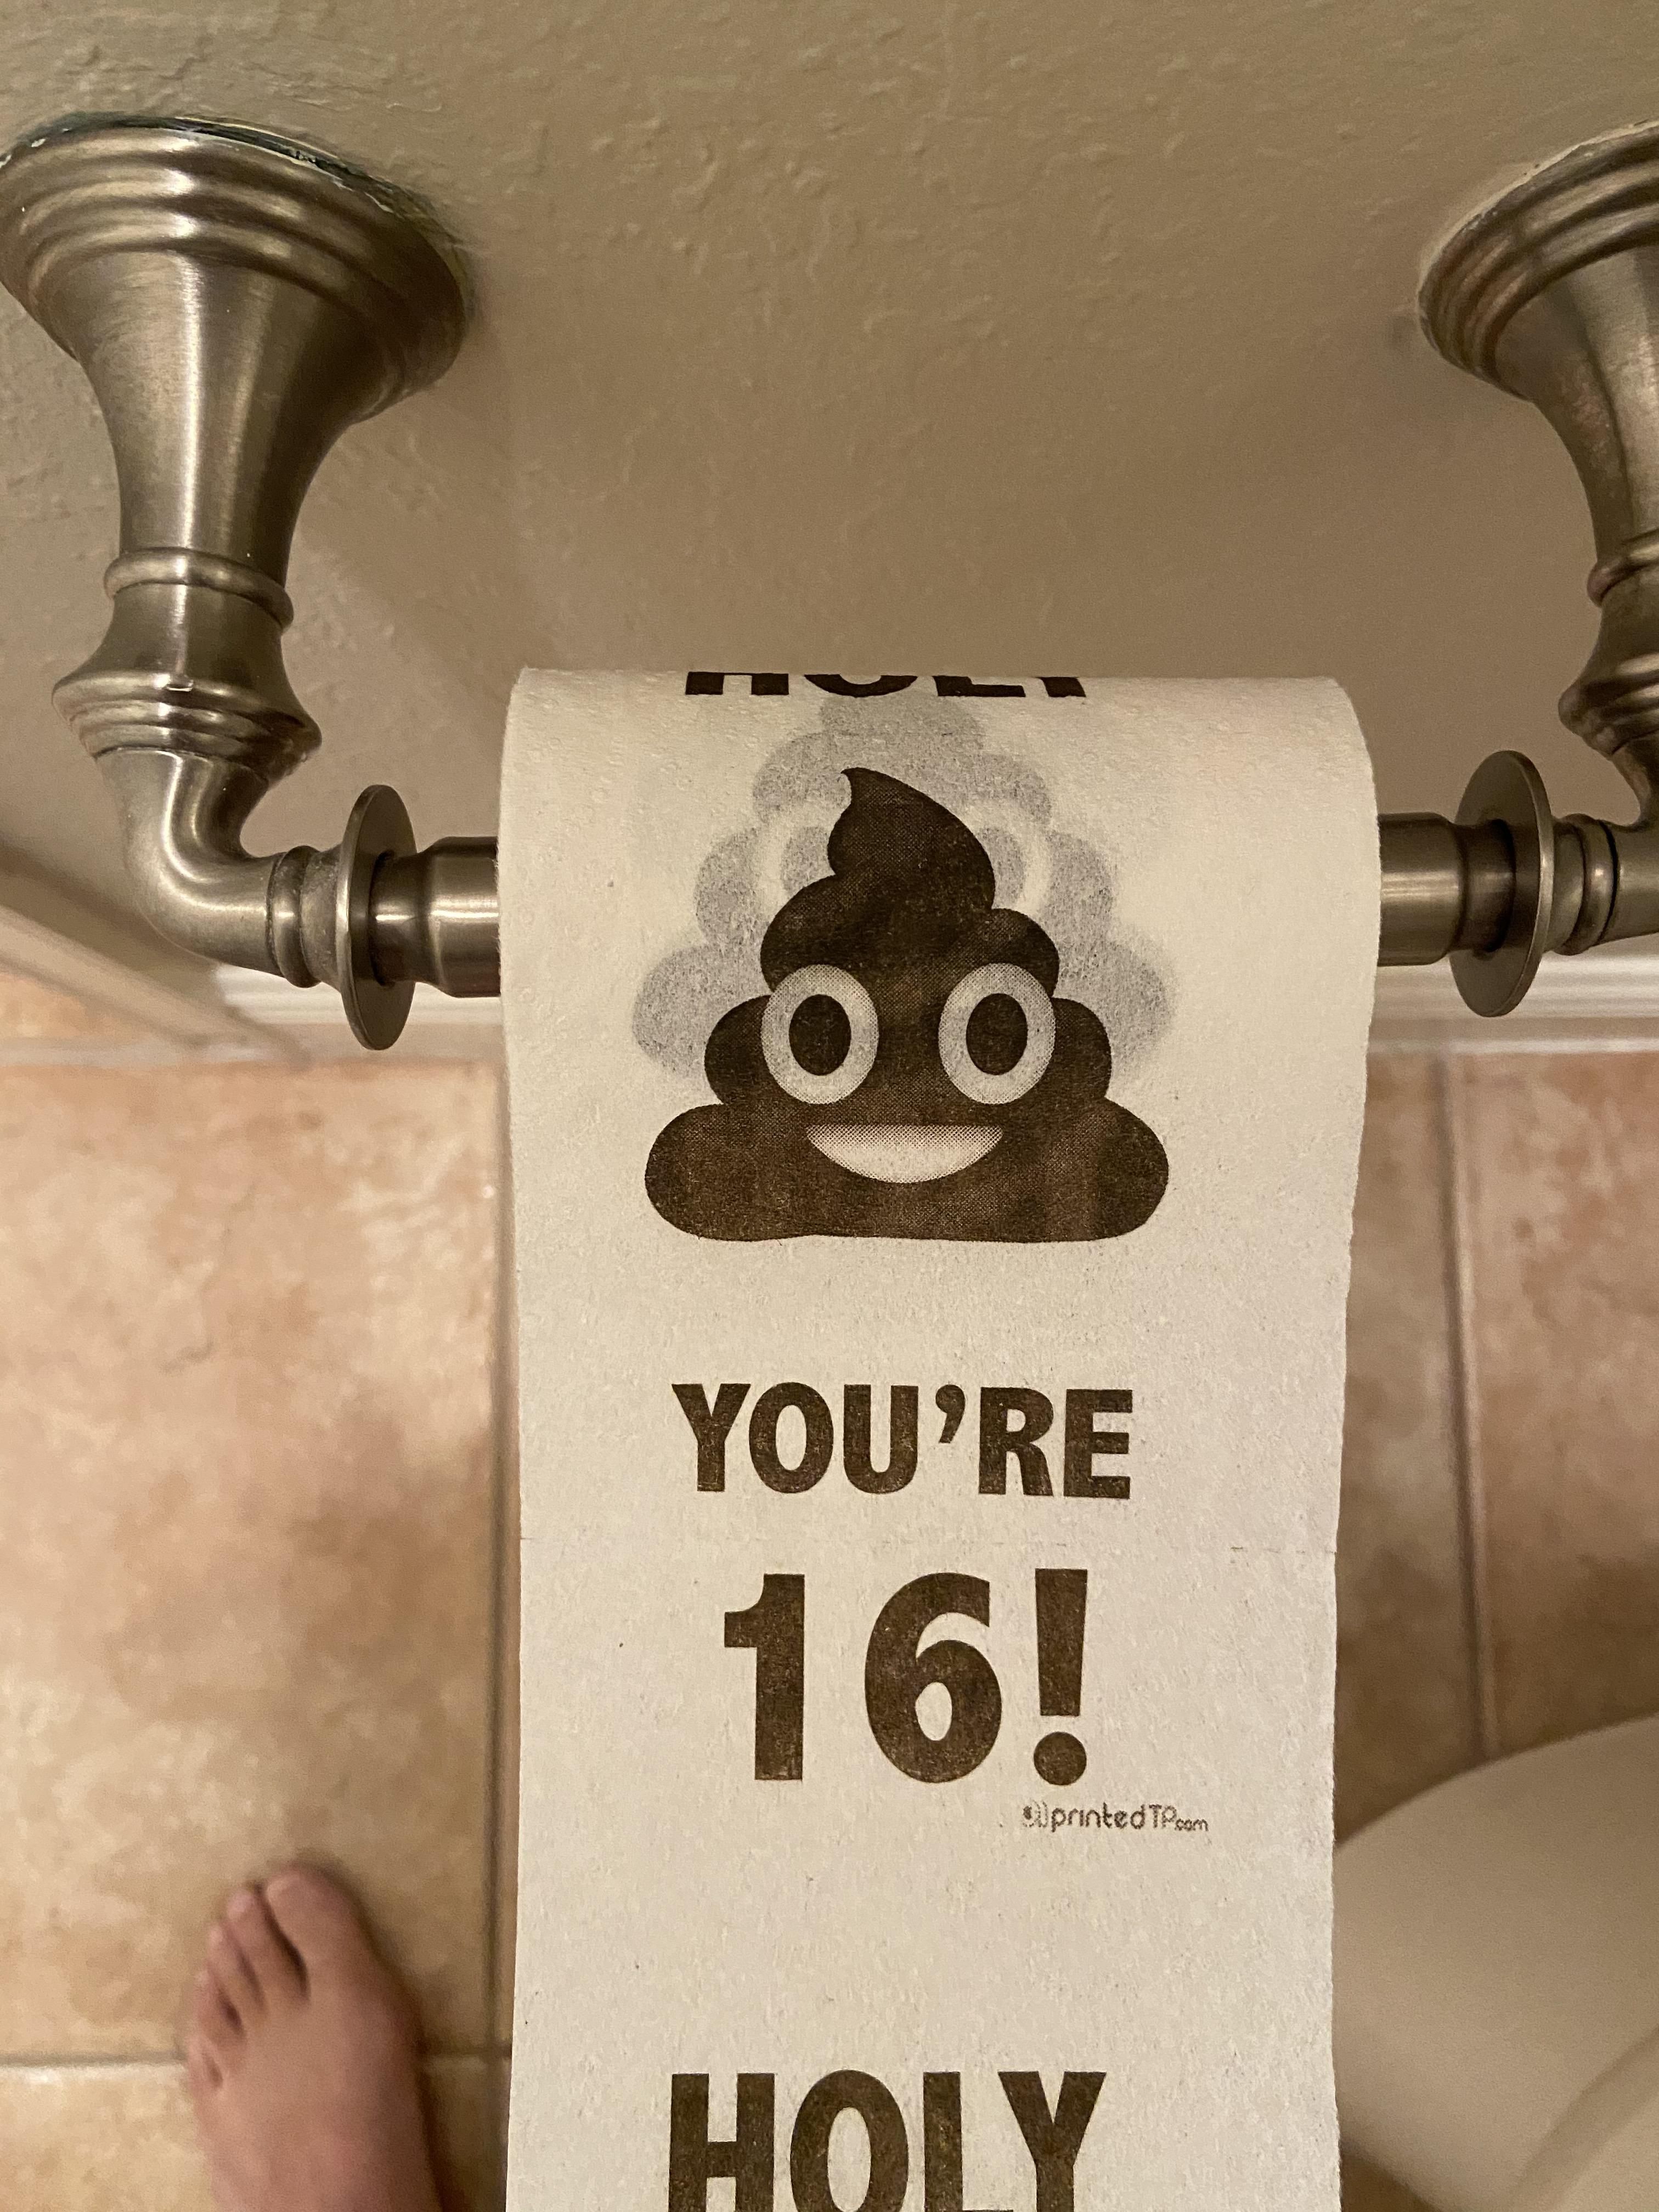 The only toilet paper my wife could find online. We’re in our 50s.